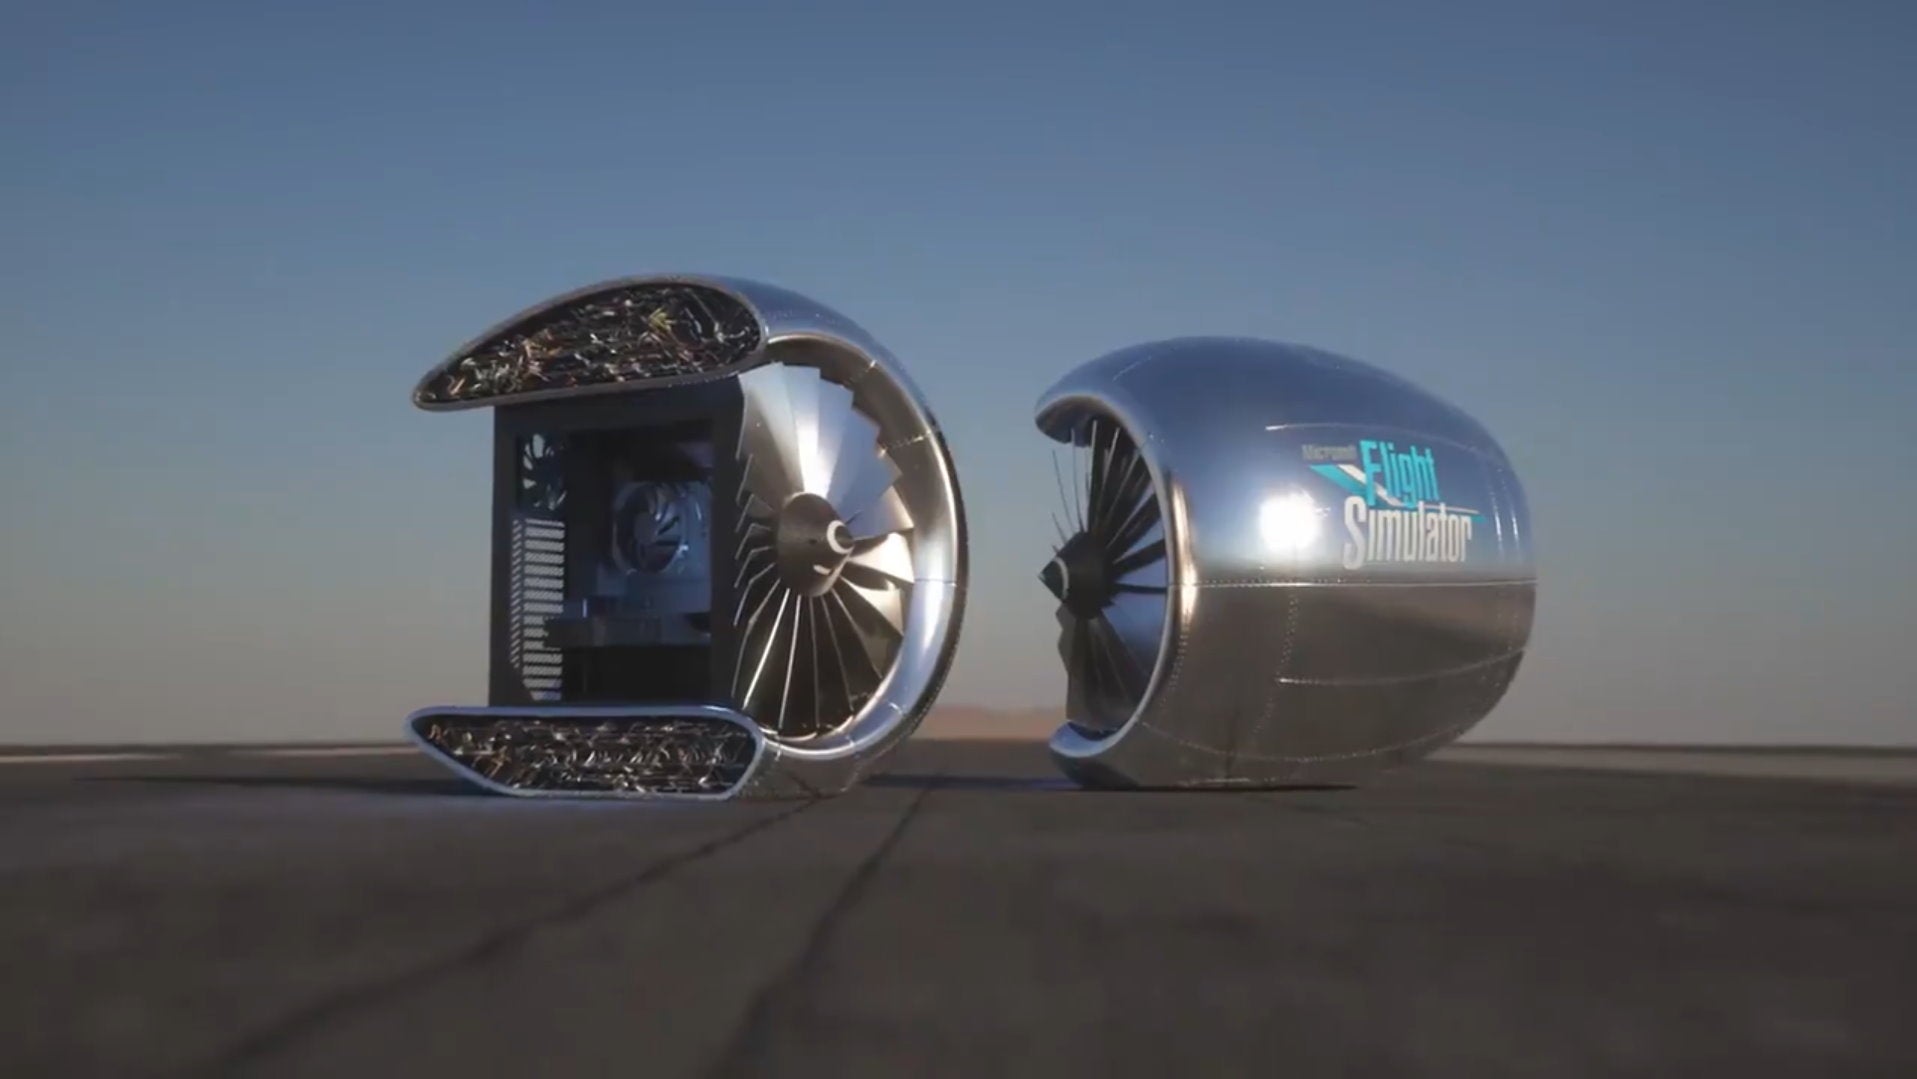 A custom PC inspired by Microsoft Flight Simulator that uses a turbine as a PC case